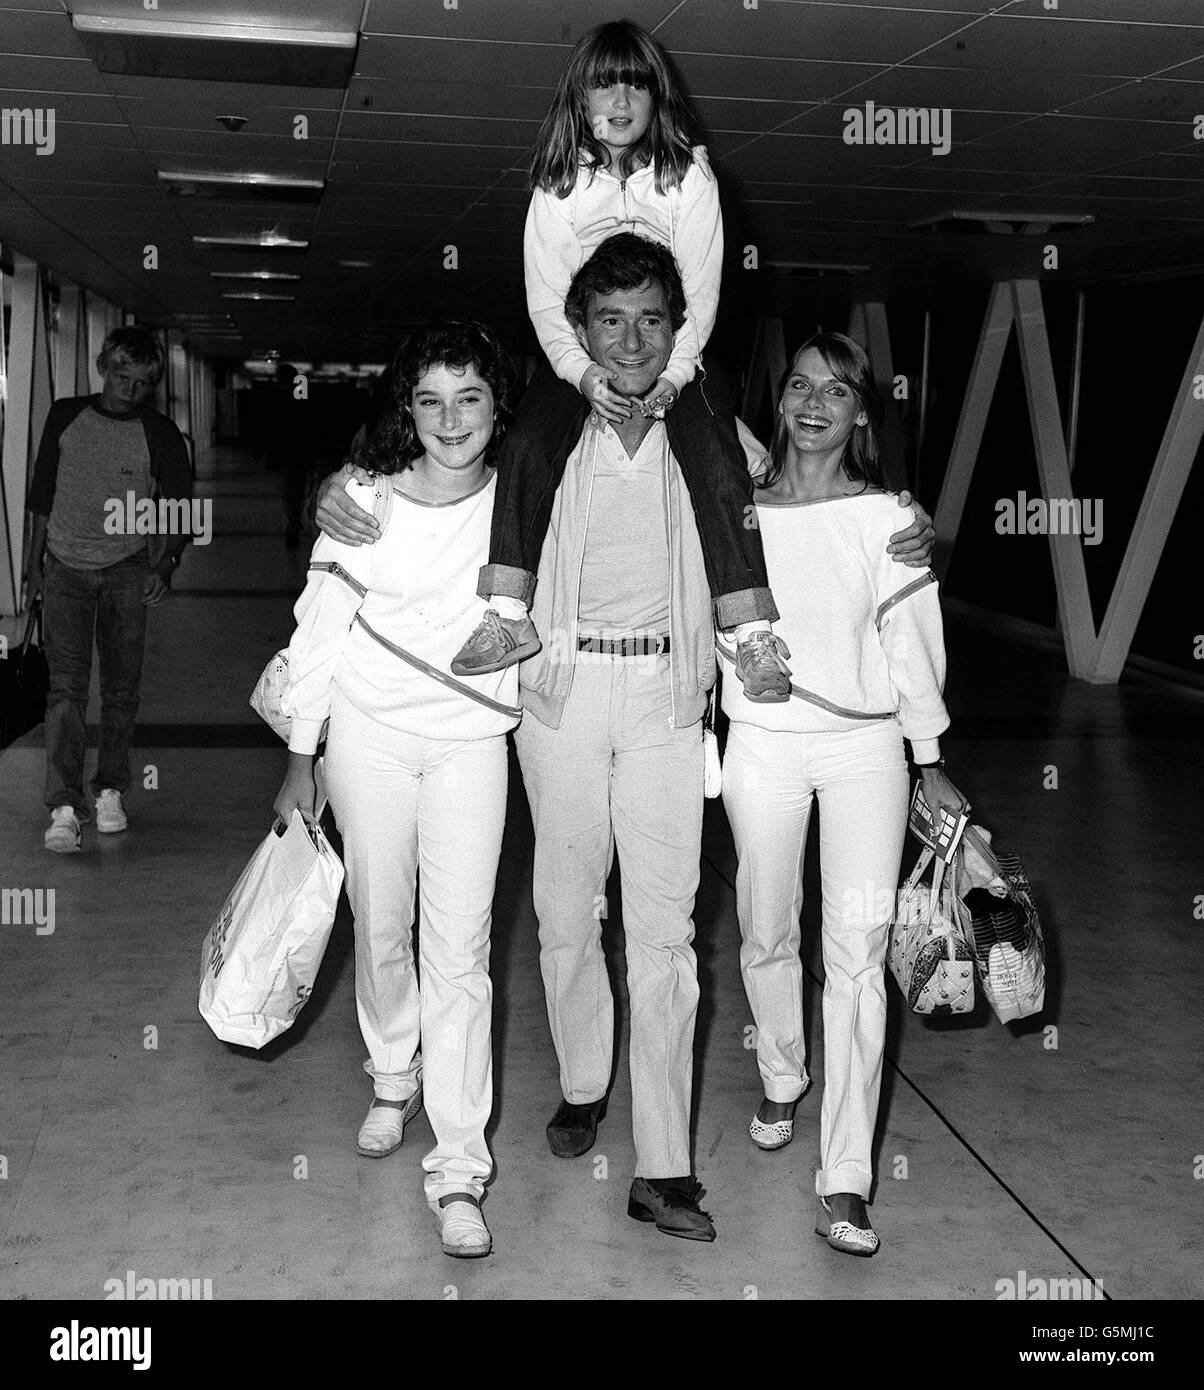 Bermuda-bound hairdresser Vidal Sassoon with his American girlfriend Jane Branneky and his daughters Catya, 13, (L) and Edith, 8, at London's Heathrow airport. Stock Photo